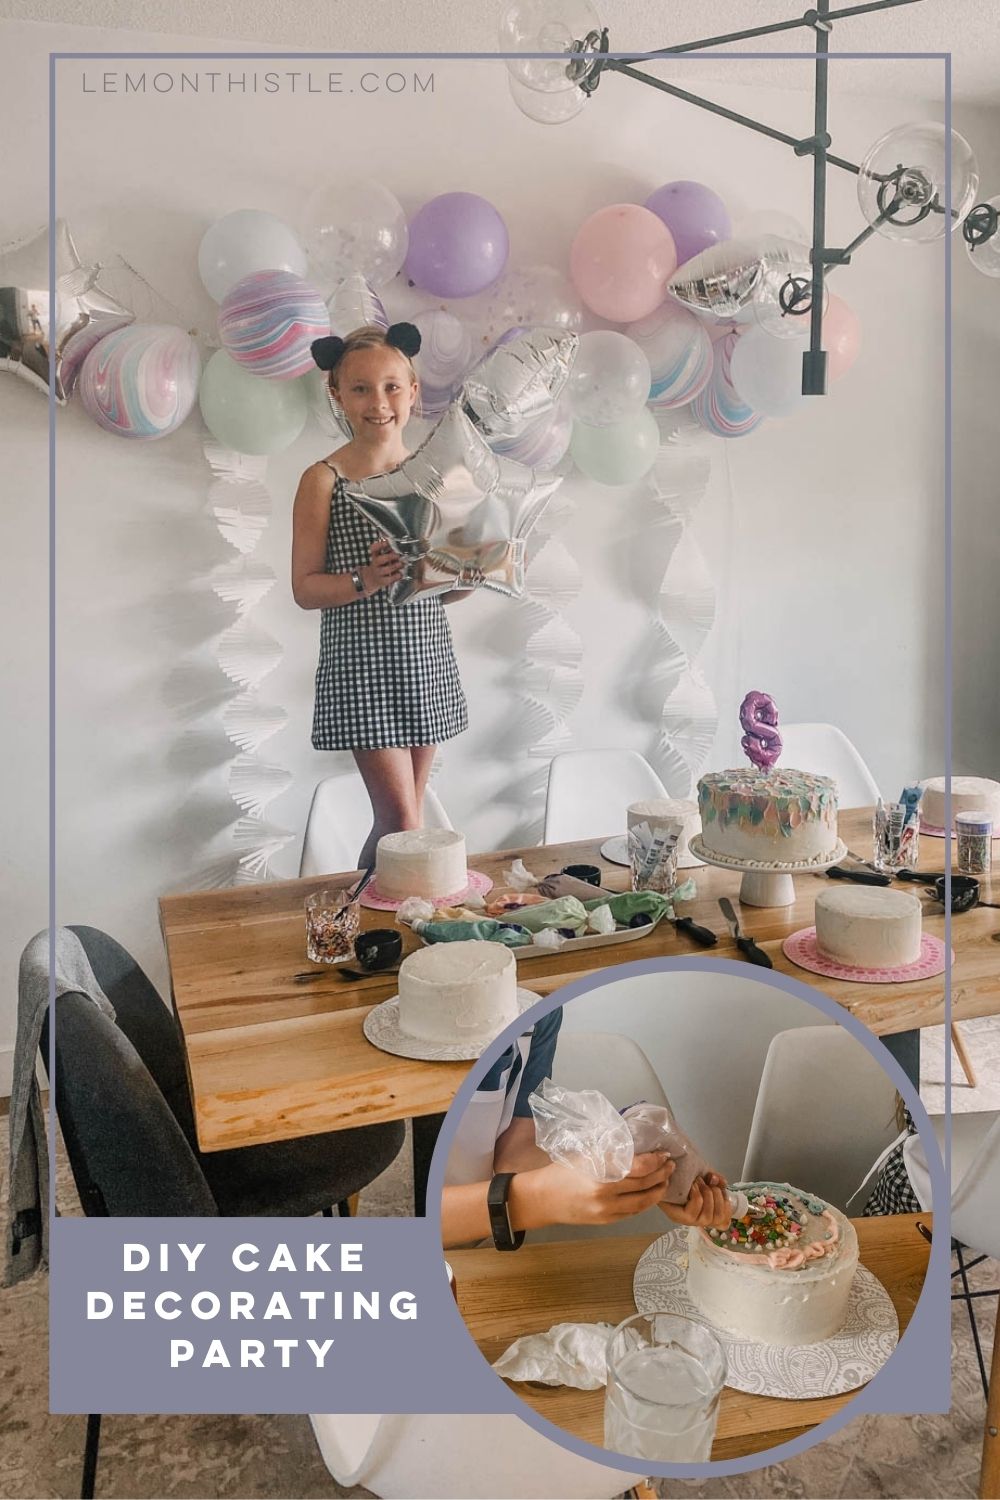 DIY Cake Decorating Party - girl standing in front of party decorations, image overlay of boy decorating cake at the party